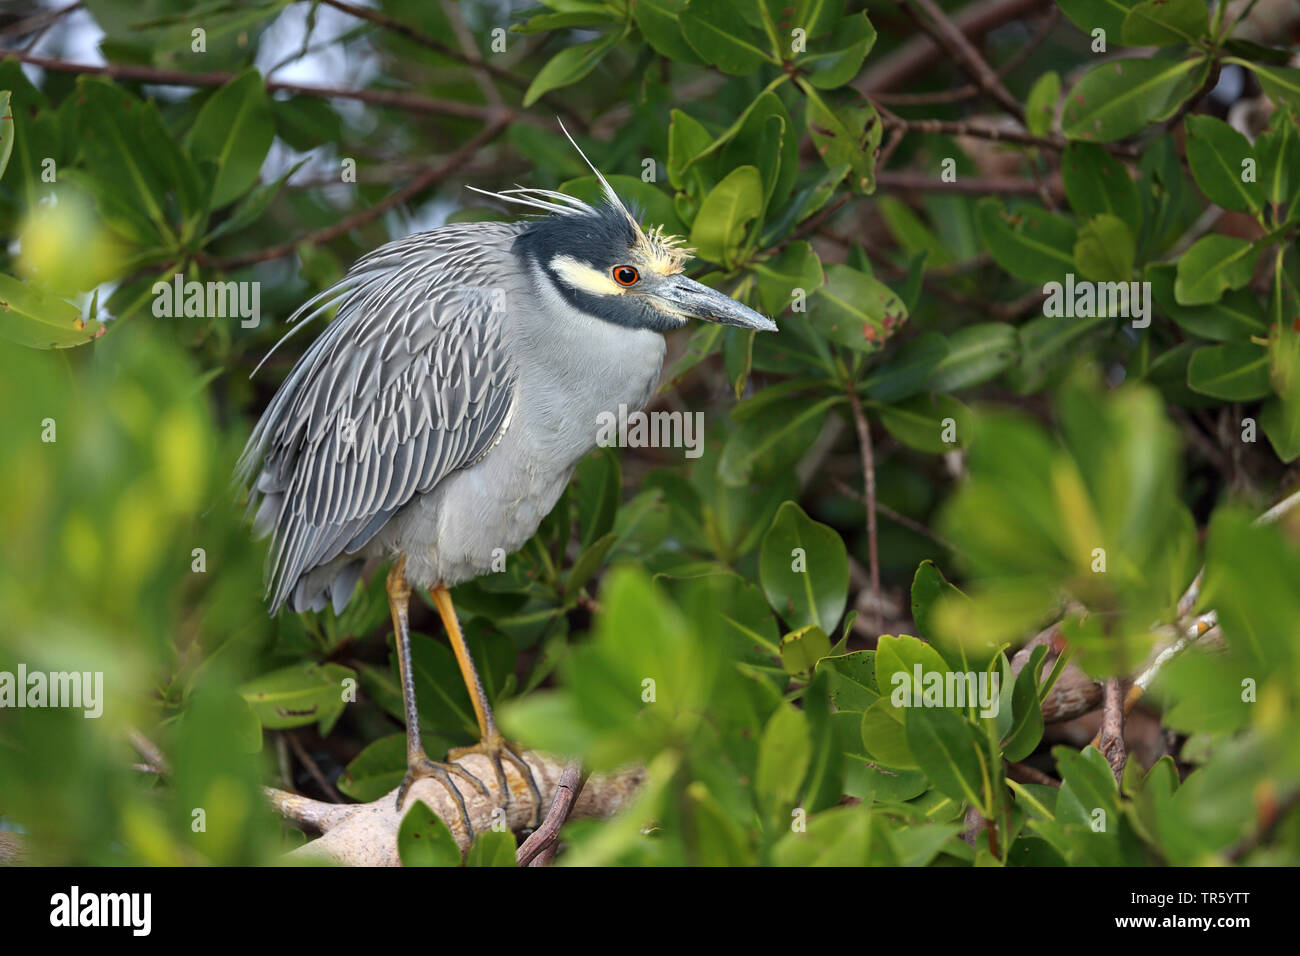 Yellow-crowned night heron, Crowned Night Heron (Nycticorax violaceus, Nyctanassa violacea), standing in the mangrove forest on a branch, Seitenansicht, USA, Florida, Sanibel Island Stock Photo